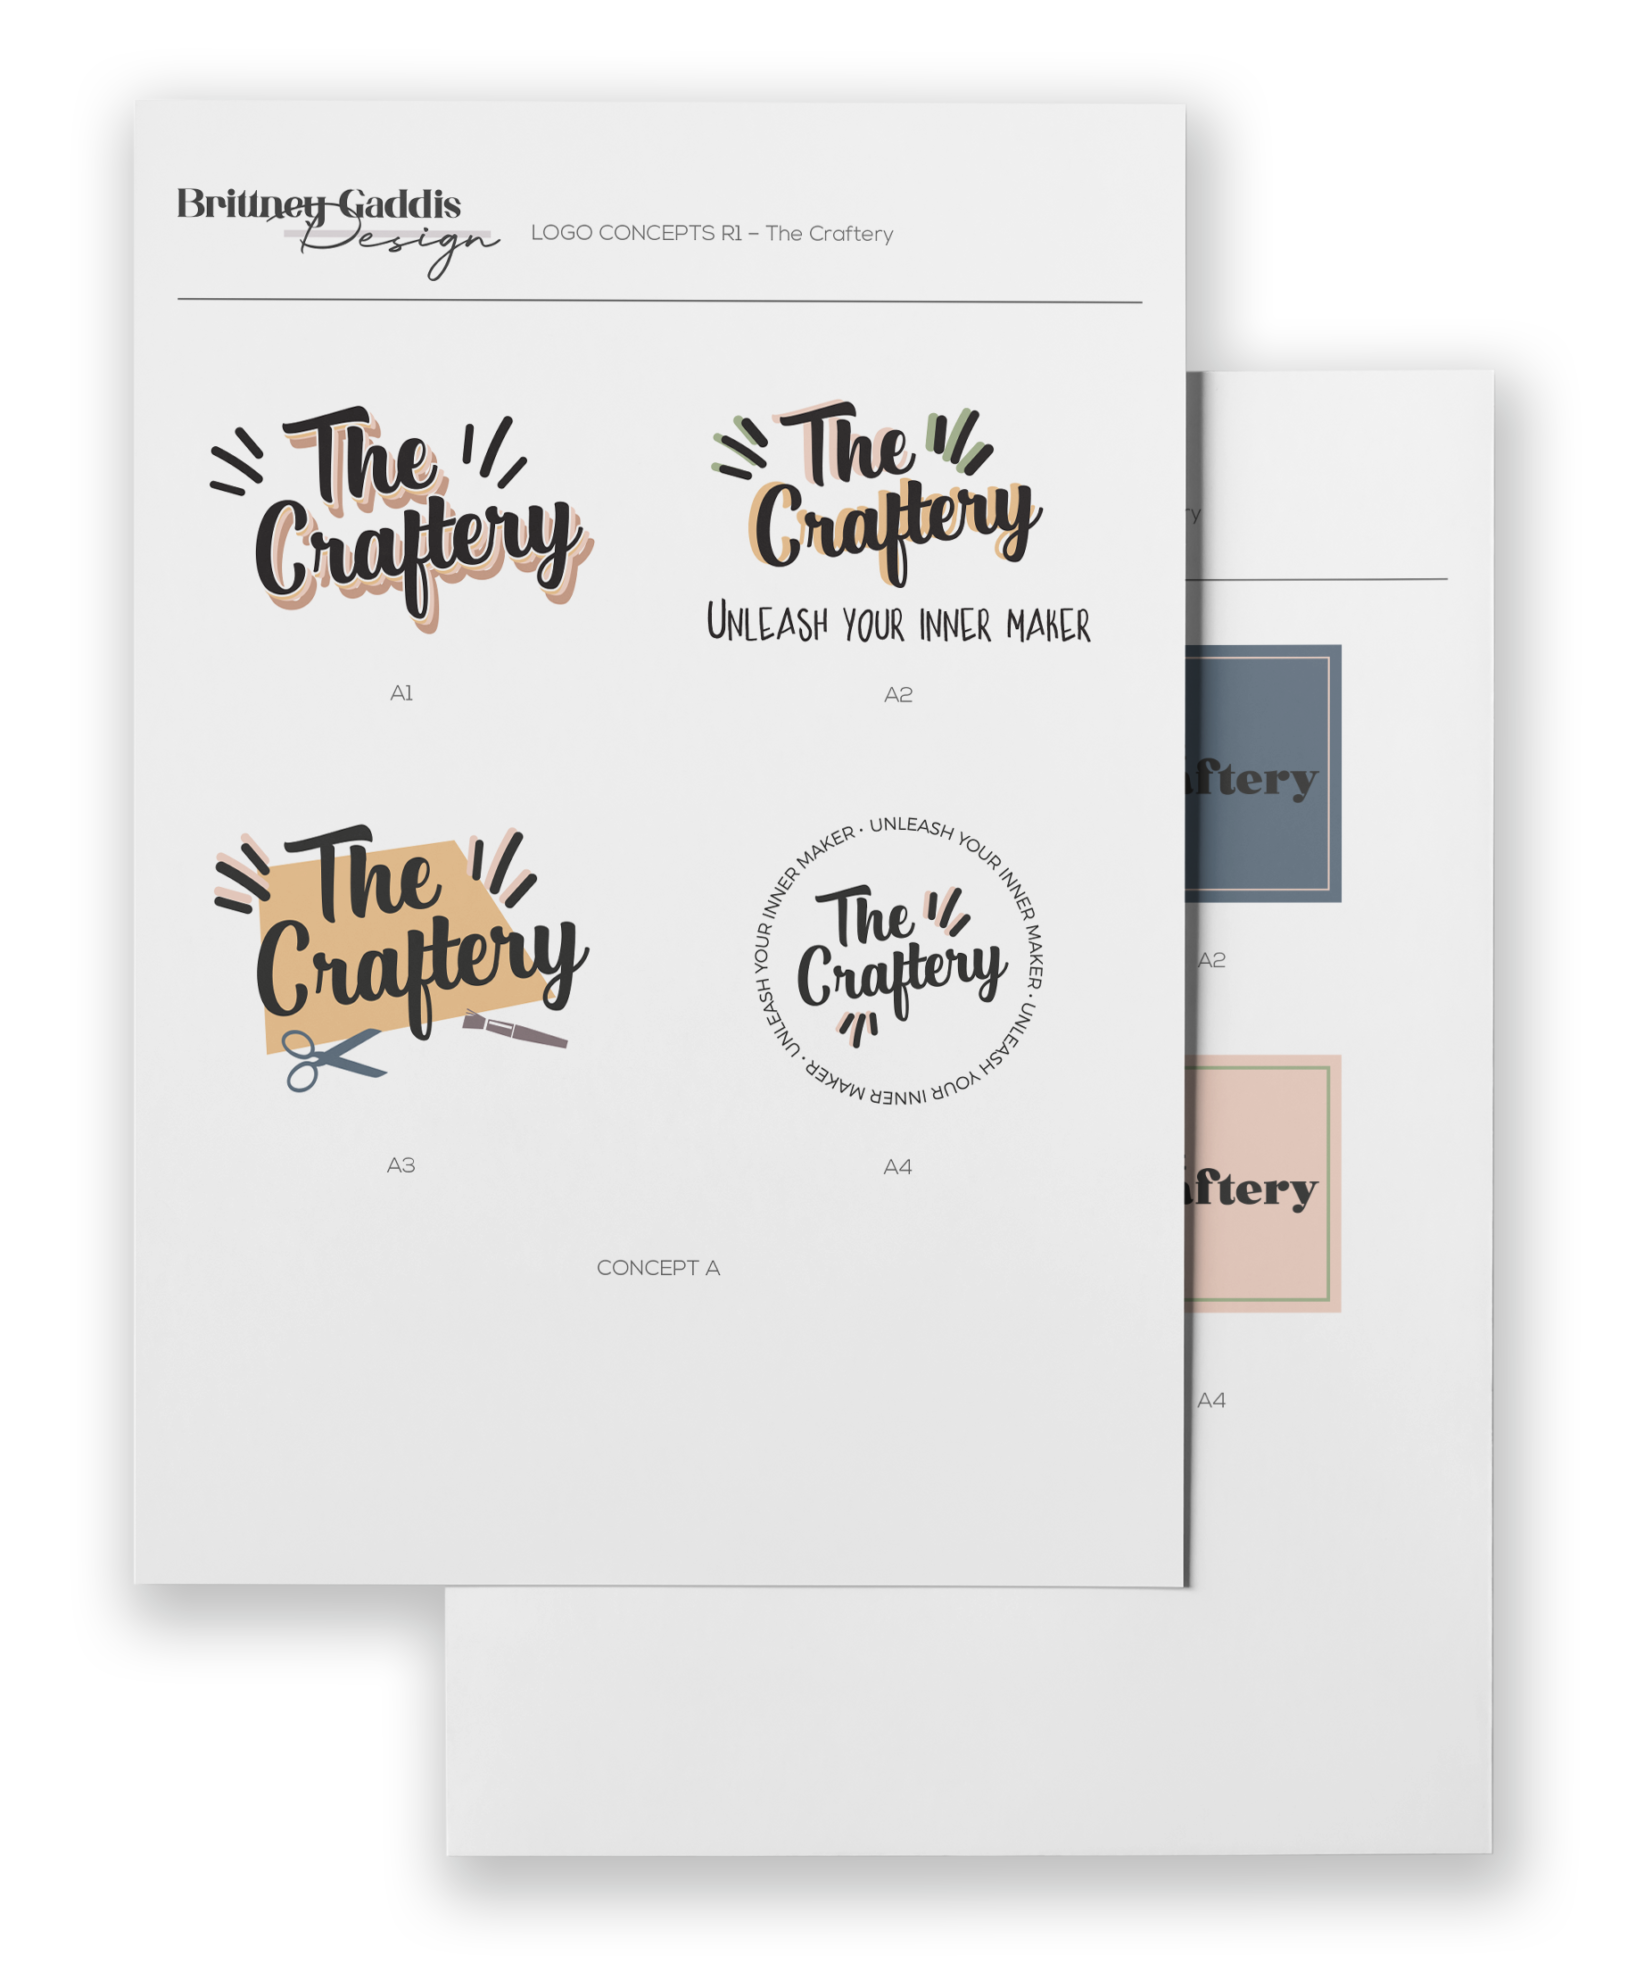 The Craftery logo design sheets